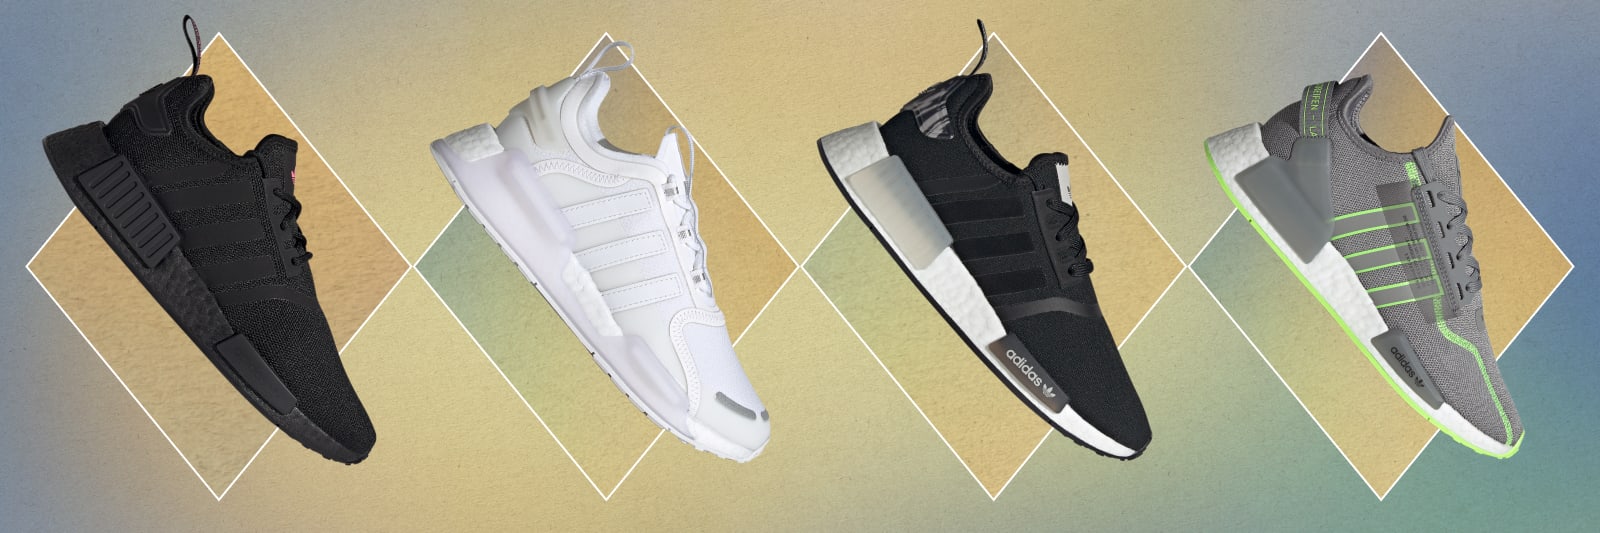 NMD Sizing: Guide to Finding the Right Fit